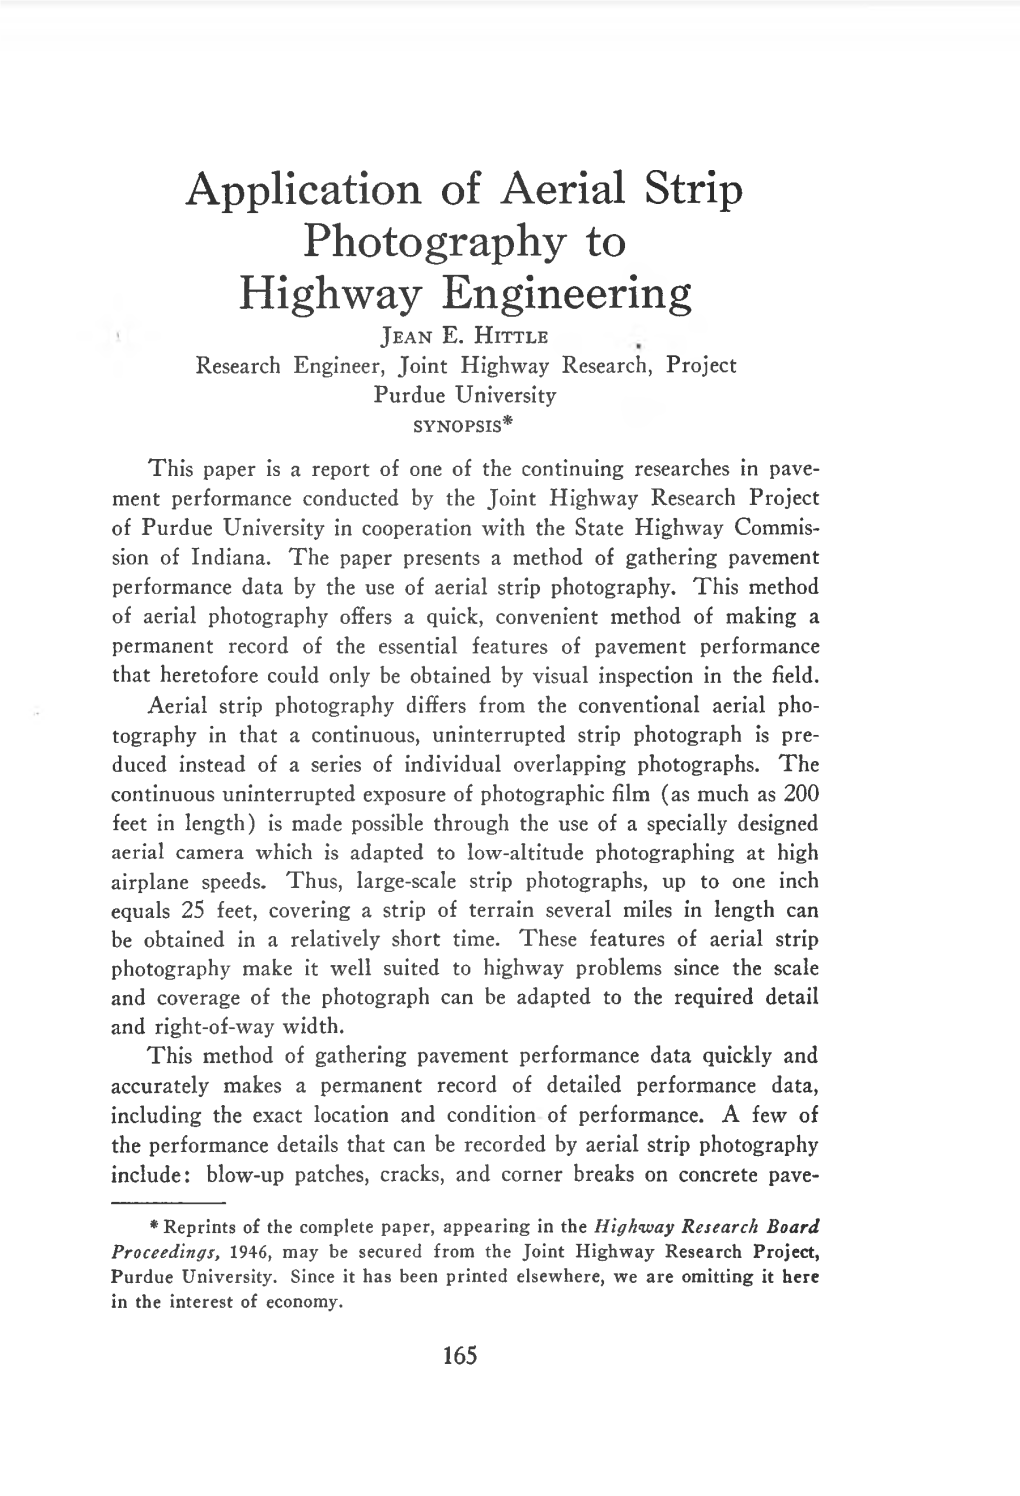 Application of Aerial Strip Photography to Highway Engineering J E a N E